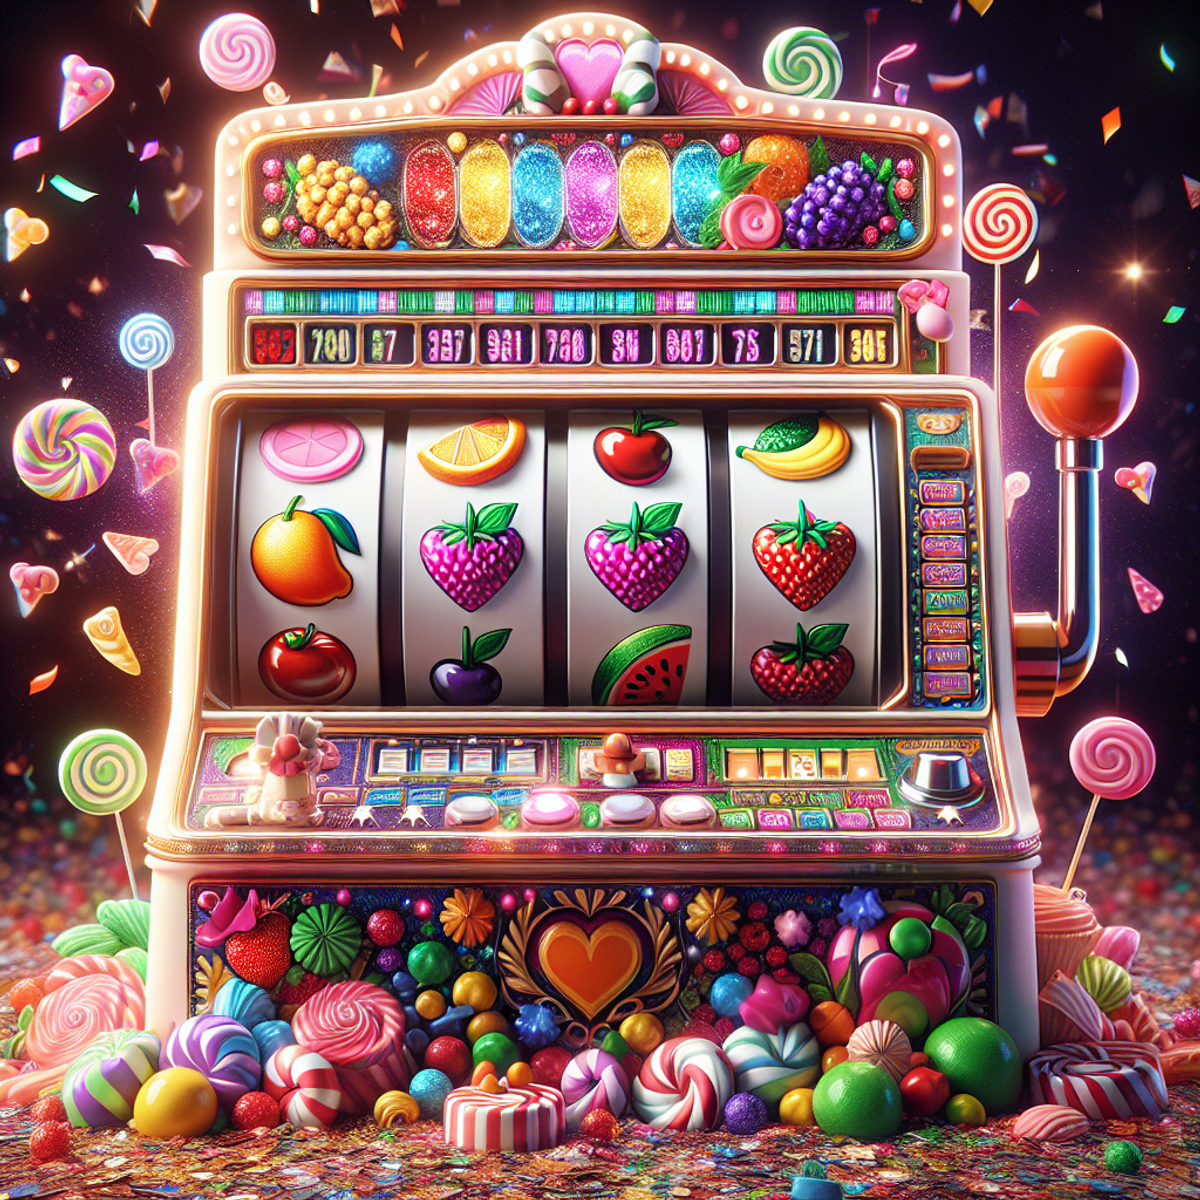 A colorful, whimsical slot machine filled with fruits and candies in a vibrant, sparkling environment.